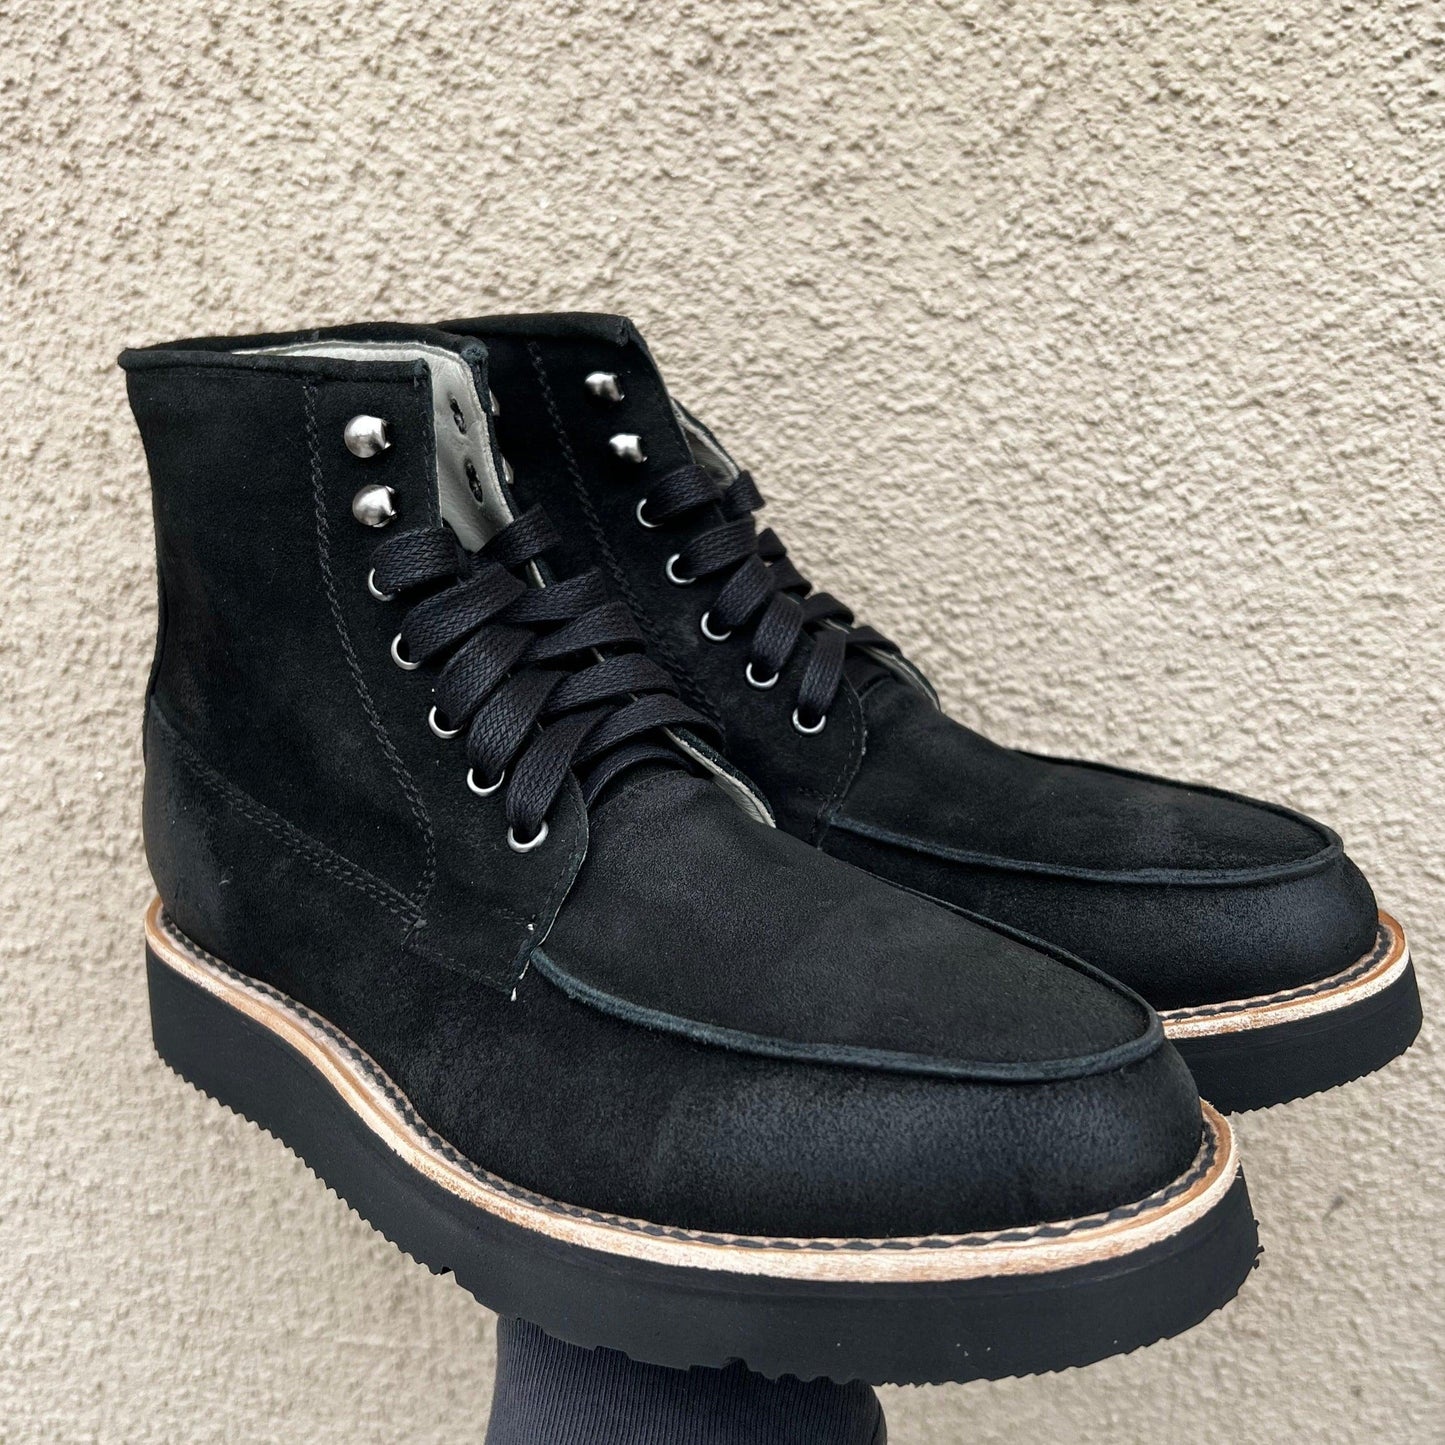 Waxed Suede Midnight Nomad Size 9.5 Item #0852 - DIEVIER